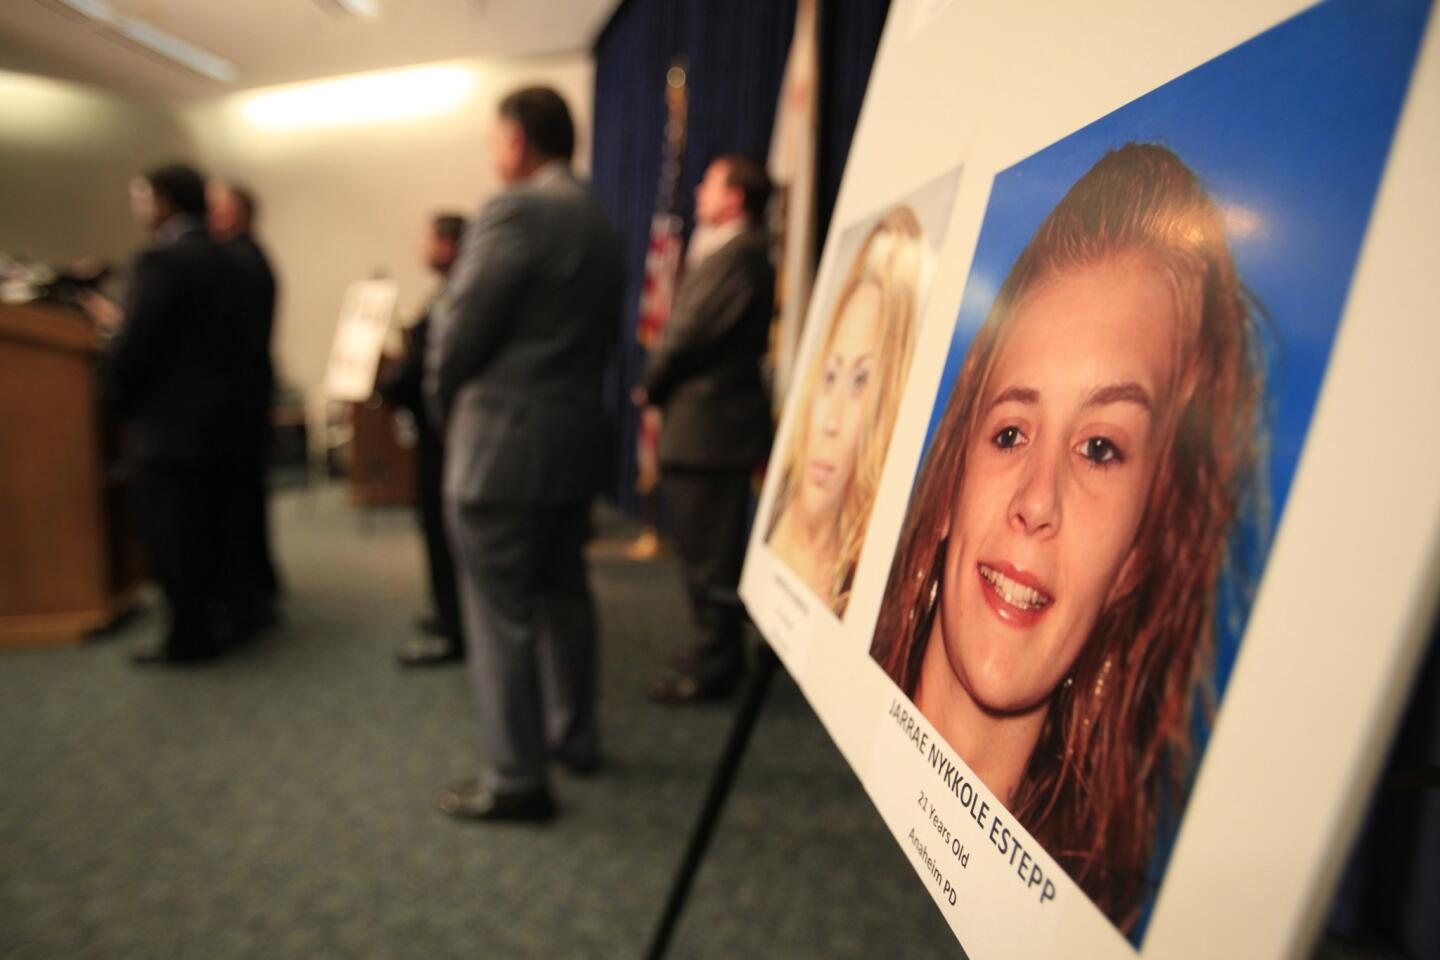 Photo of Jarrae Nykkole Estepp, 21, bottom right, at an Anaheim press conference where authorities discussed the deaths of at least four women, allegedly at the hands of two Anaheim men.